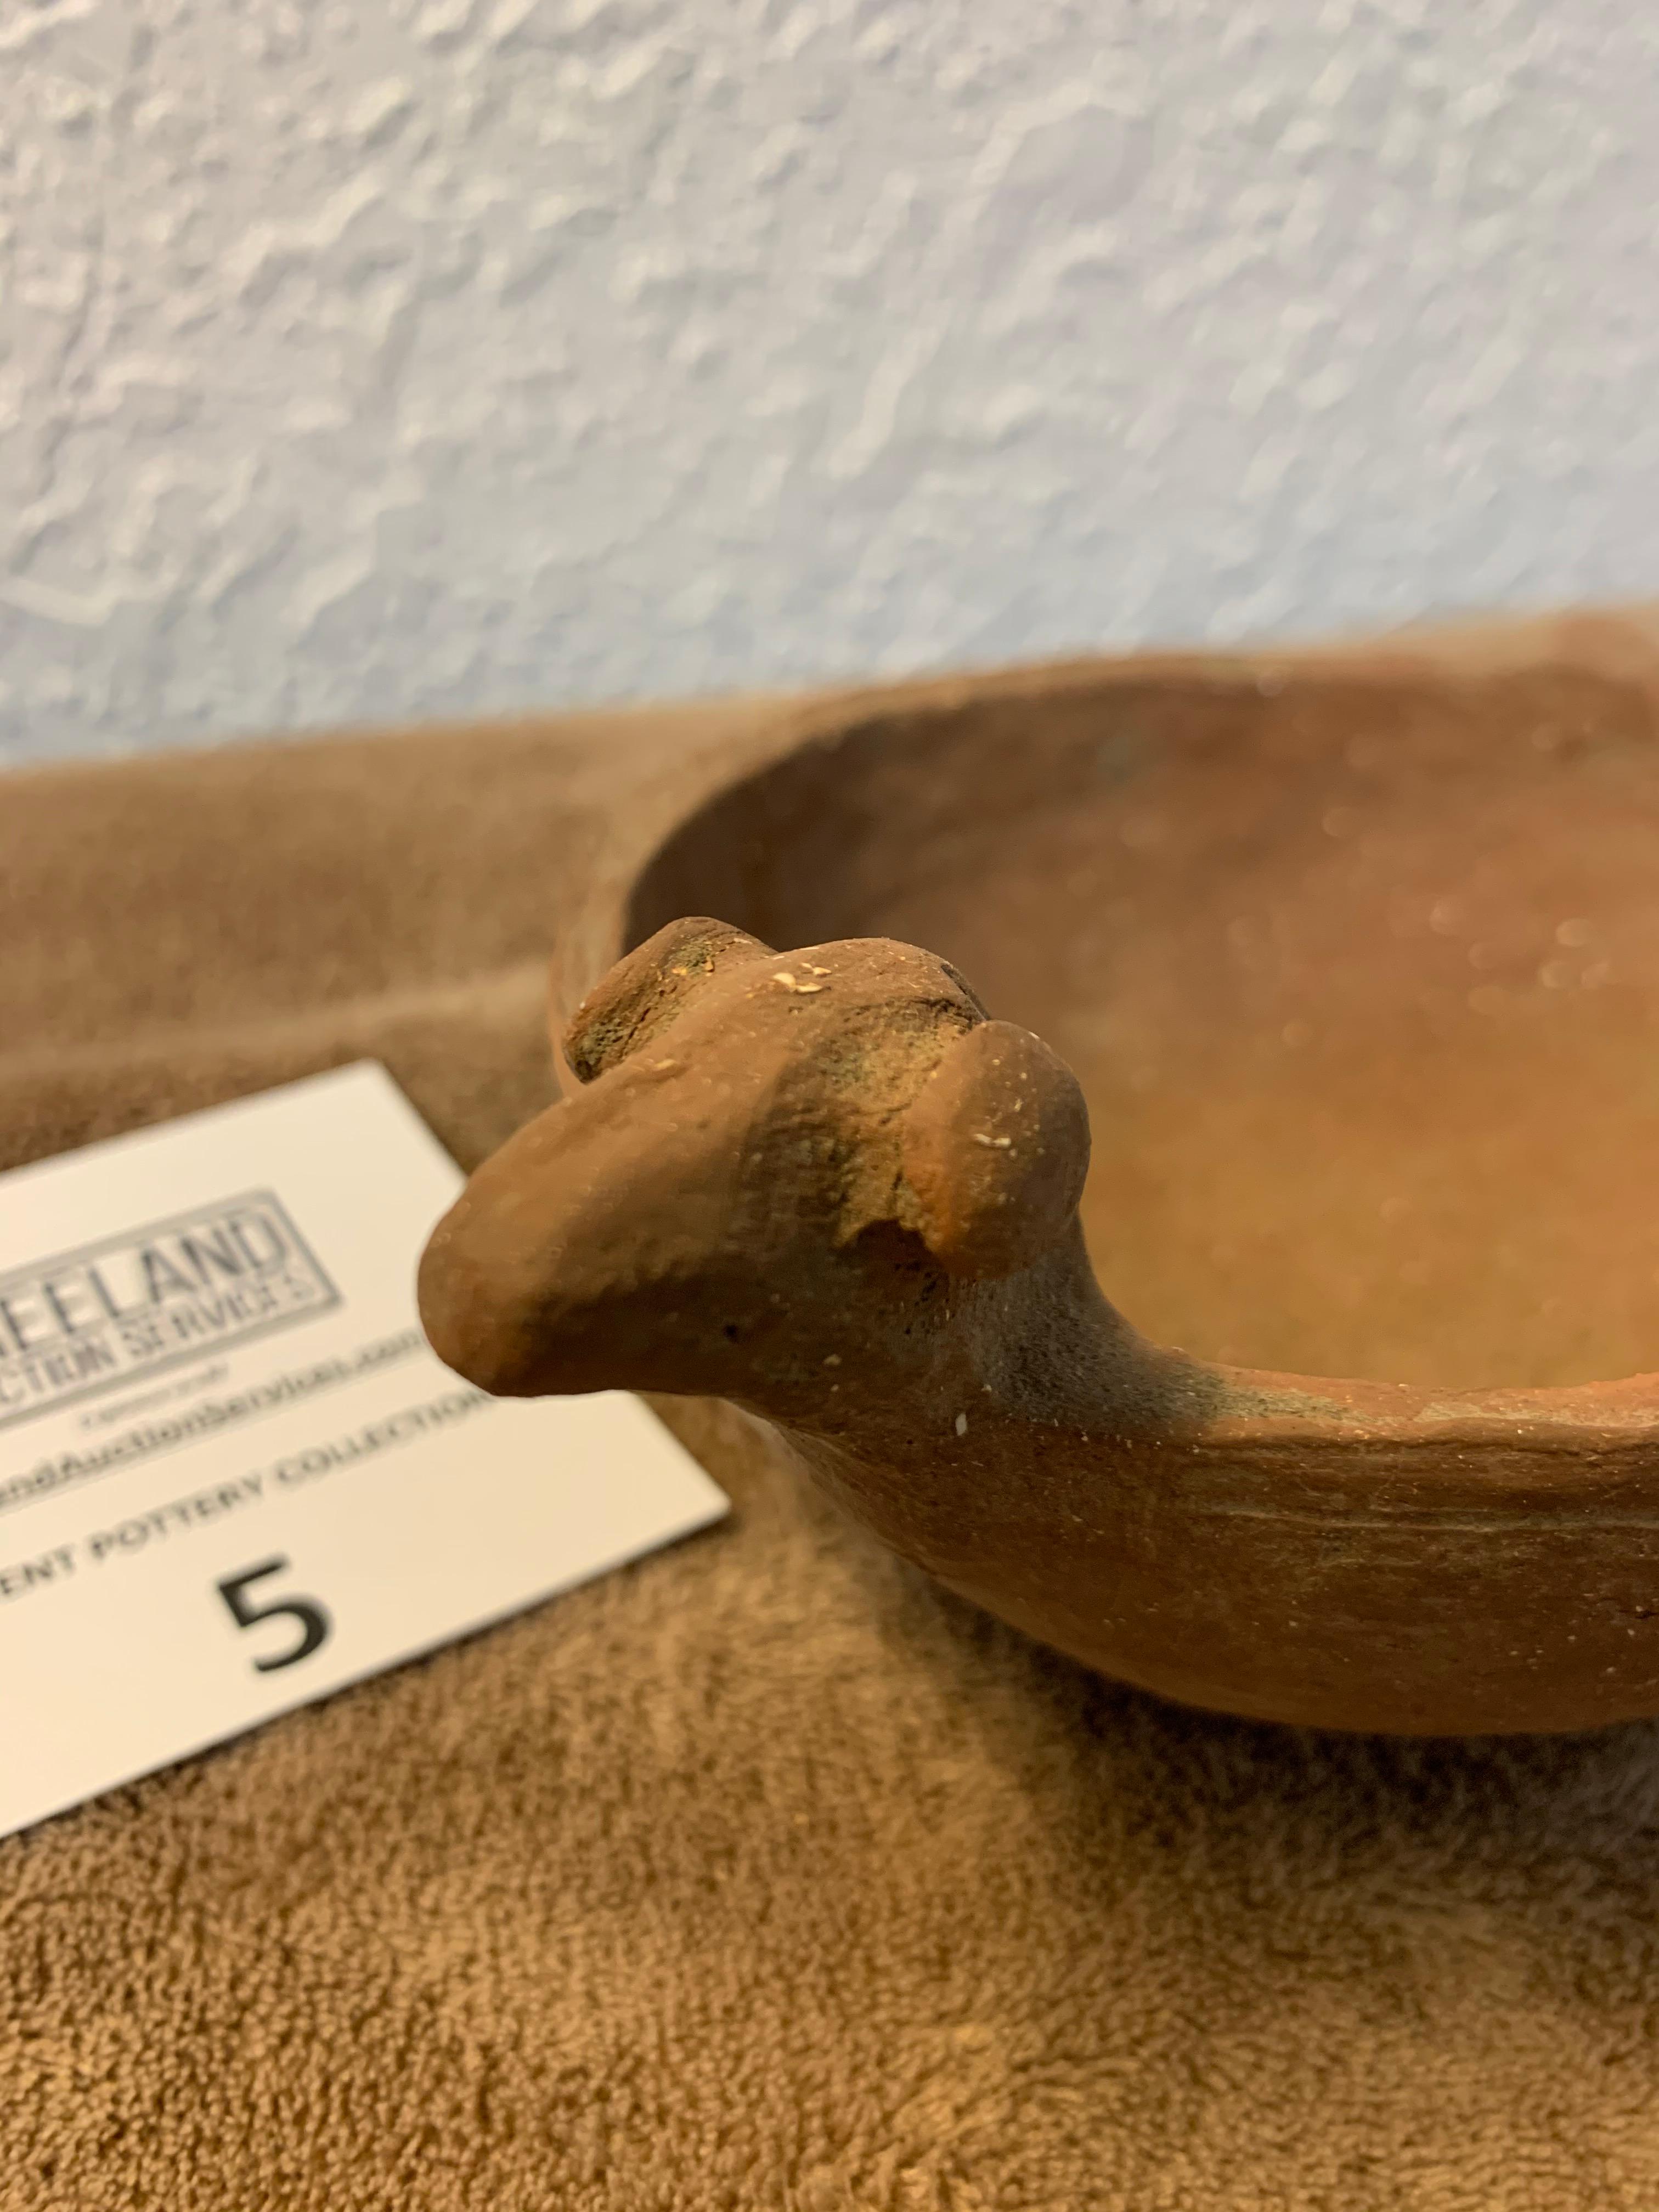 Effigy Animal Pottery Vessel With Unknown Animal Possibly A Deer